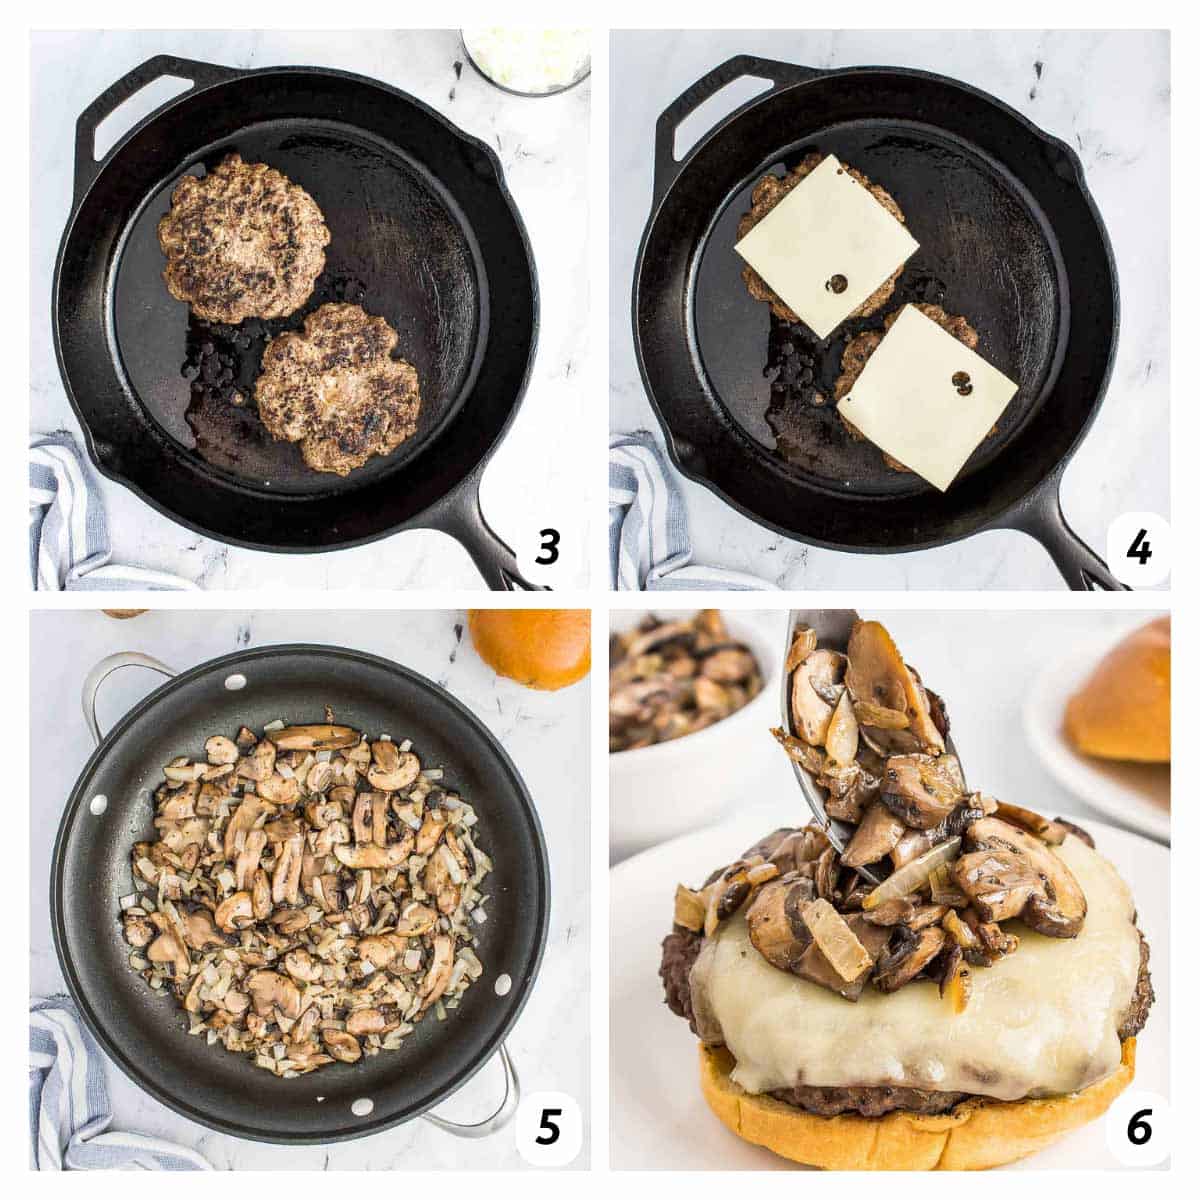 Four panel grid of process shots 3-6 - cooking patties in a cast iron skillet, adding cheese, sautéing mushrooms and onions, and assembling burgers.